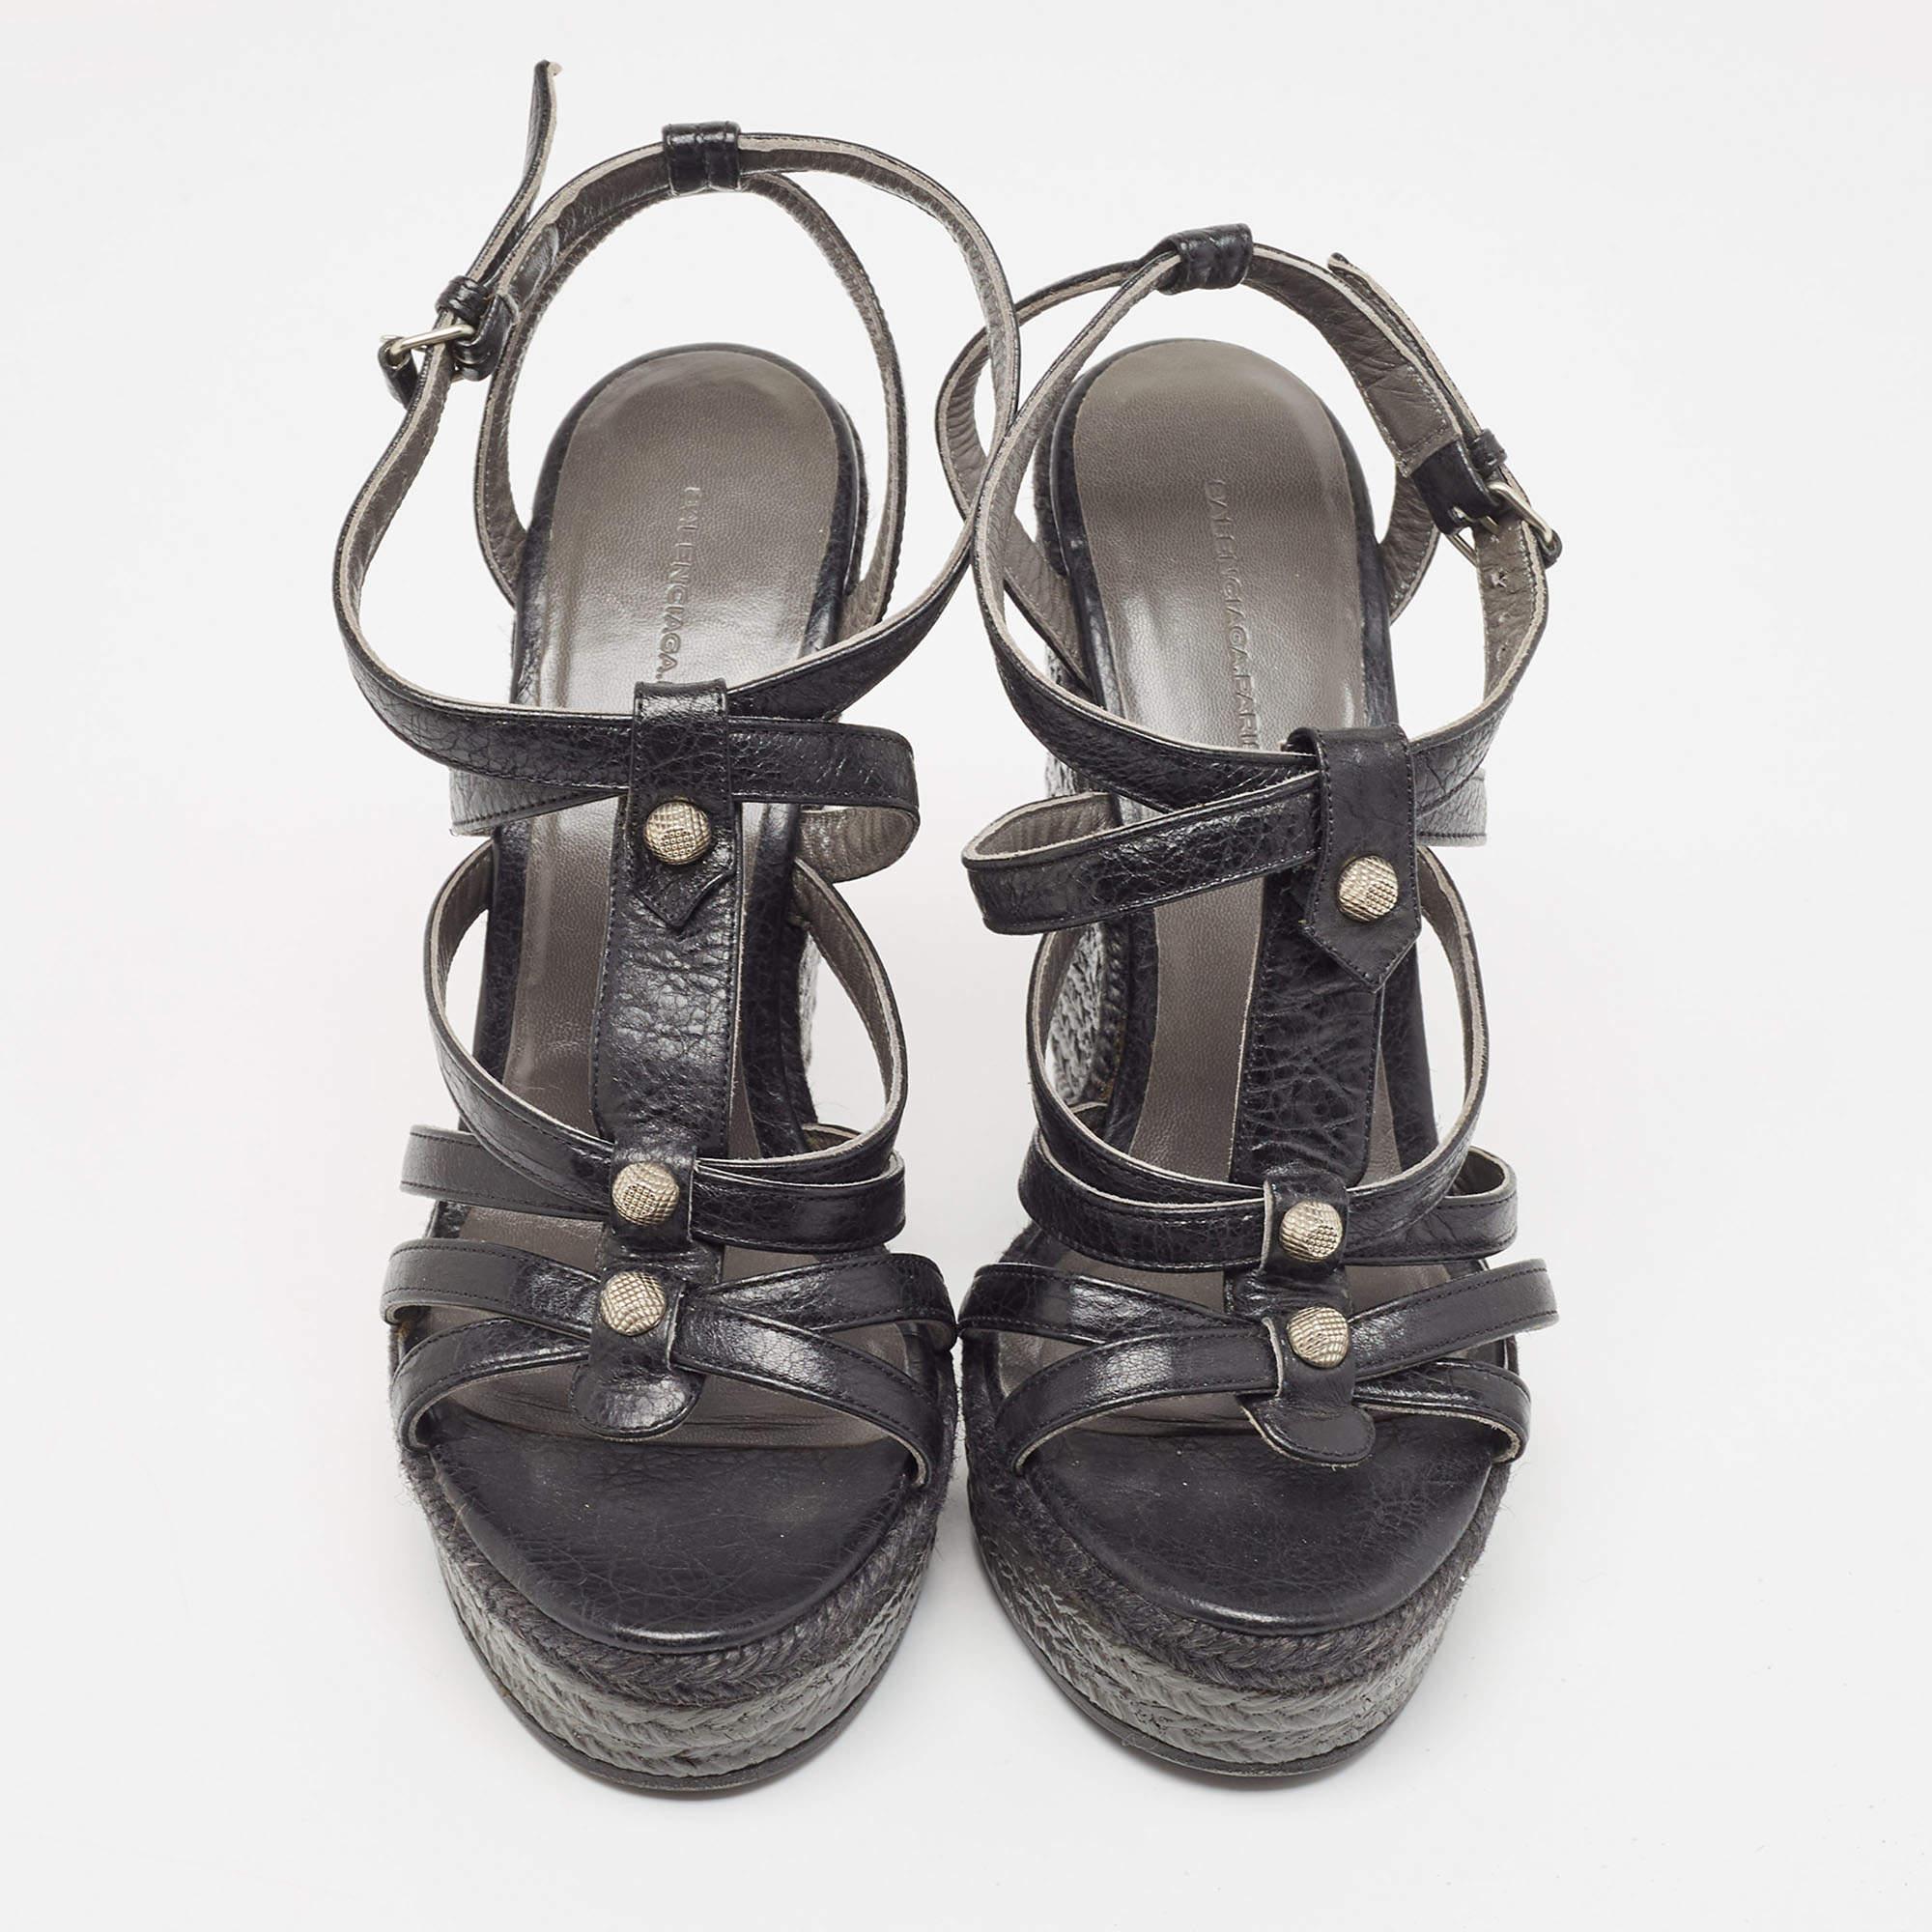 How lovely do these sandals from Balenciaga look! These black sandals are crafted from leather and feature an open toe silhouette. They flaunt a cage design with multiple silver-tone studs adorning the straps. Equipped with buckled ankle straps and